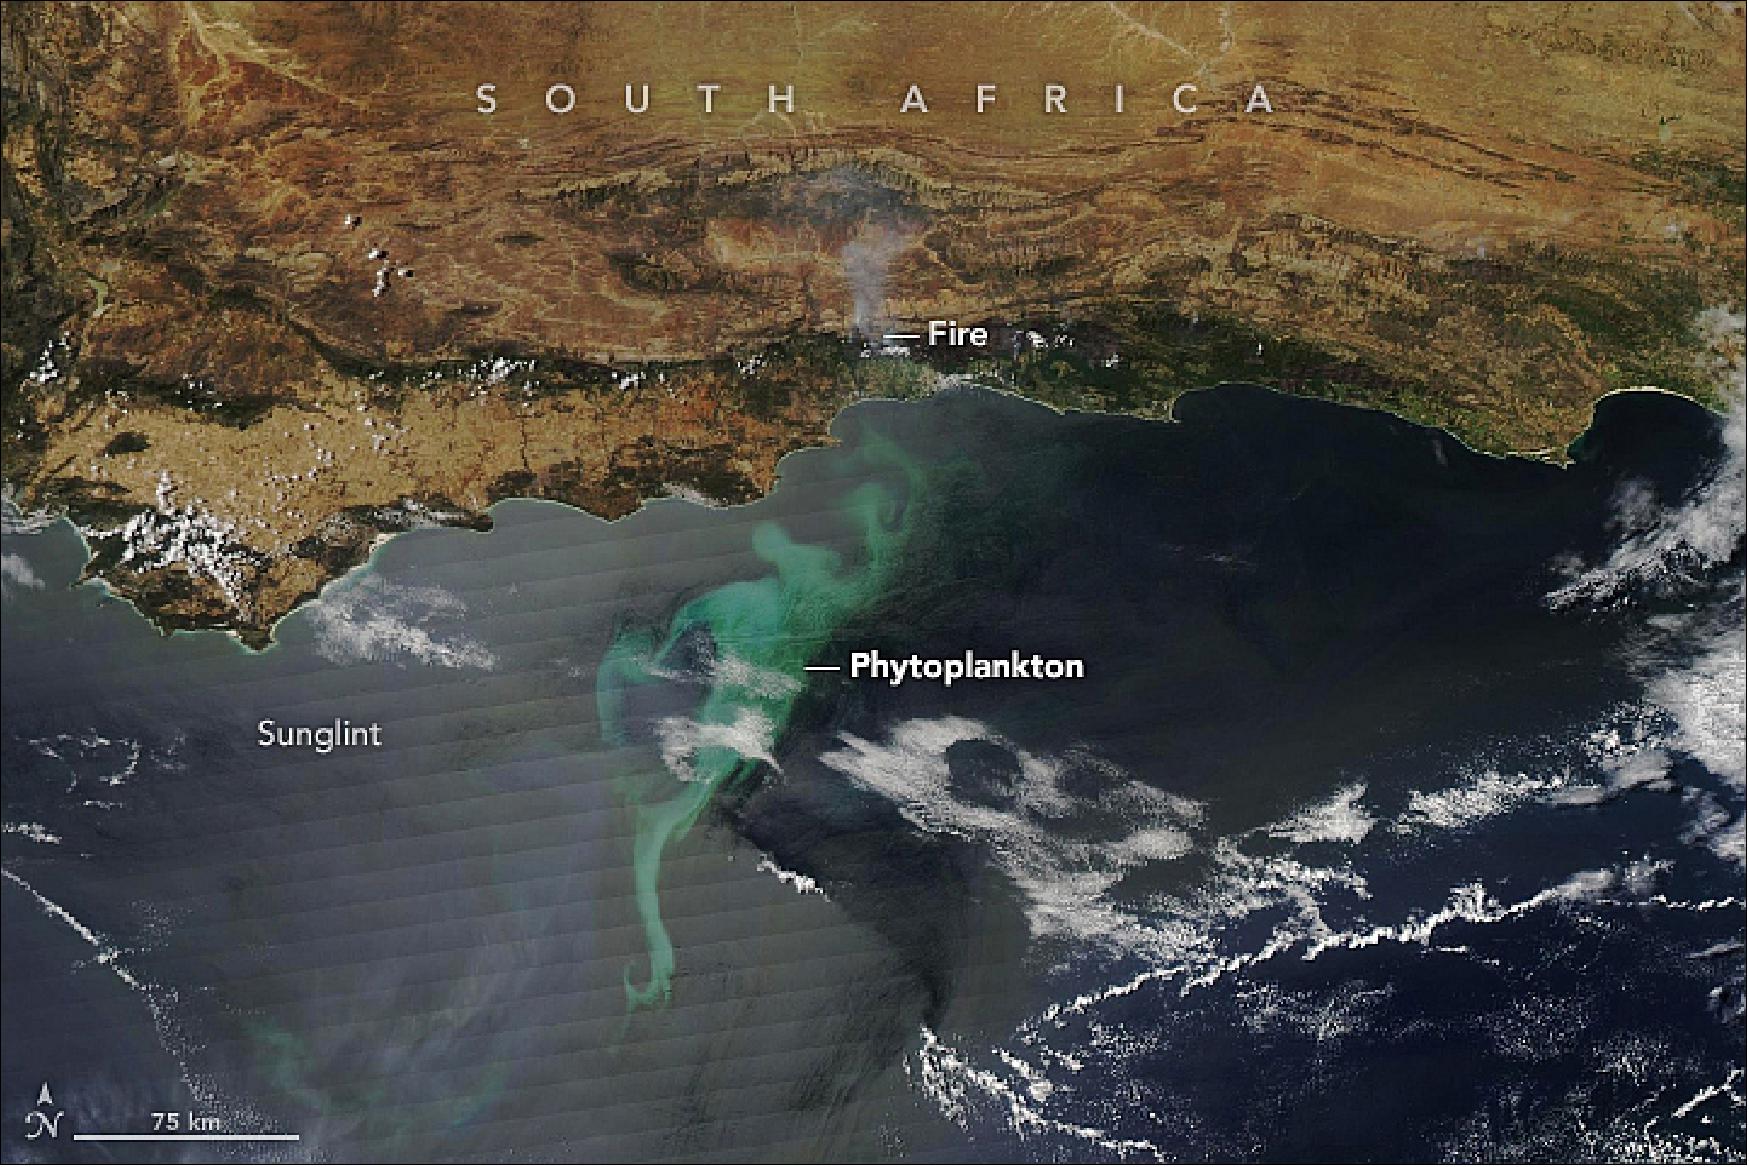 Figure 46: The MODIS instrument on NASA's Aqua satellite acquired this natural-color image on 14 November 2018. It shows a bloom of phytoplankton off the south coast of South Africa. The bloom first became visible on 9 November and was still underway on 16 November (image credit: NASA Earth Observatory, image by Lauren Dauphin, using MODIS data from NASA EOSDIS/LANCE and GIBS/Worldview, story by Michael Carlowicz)